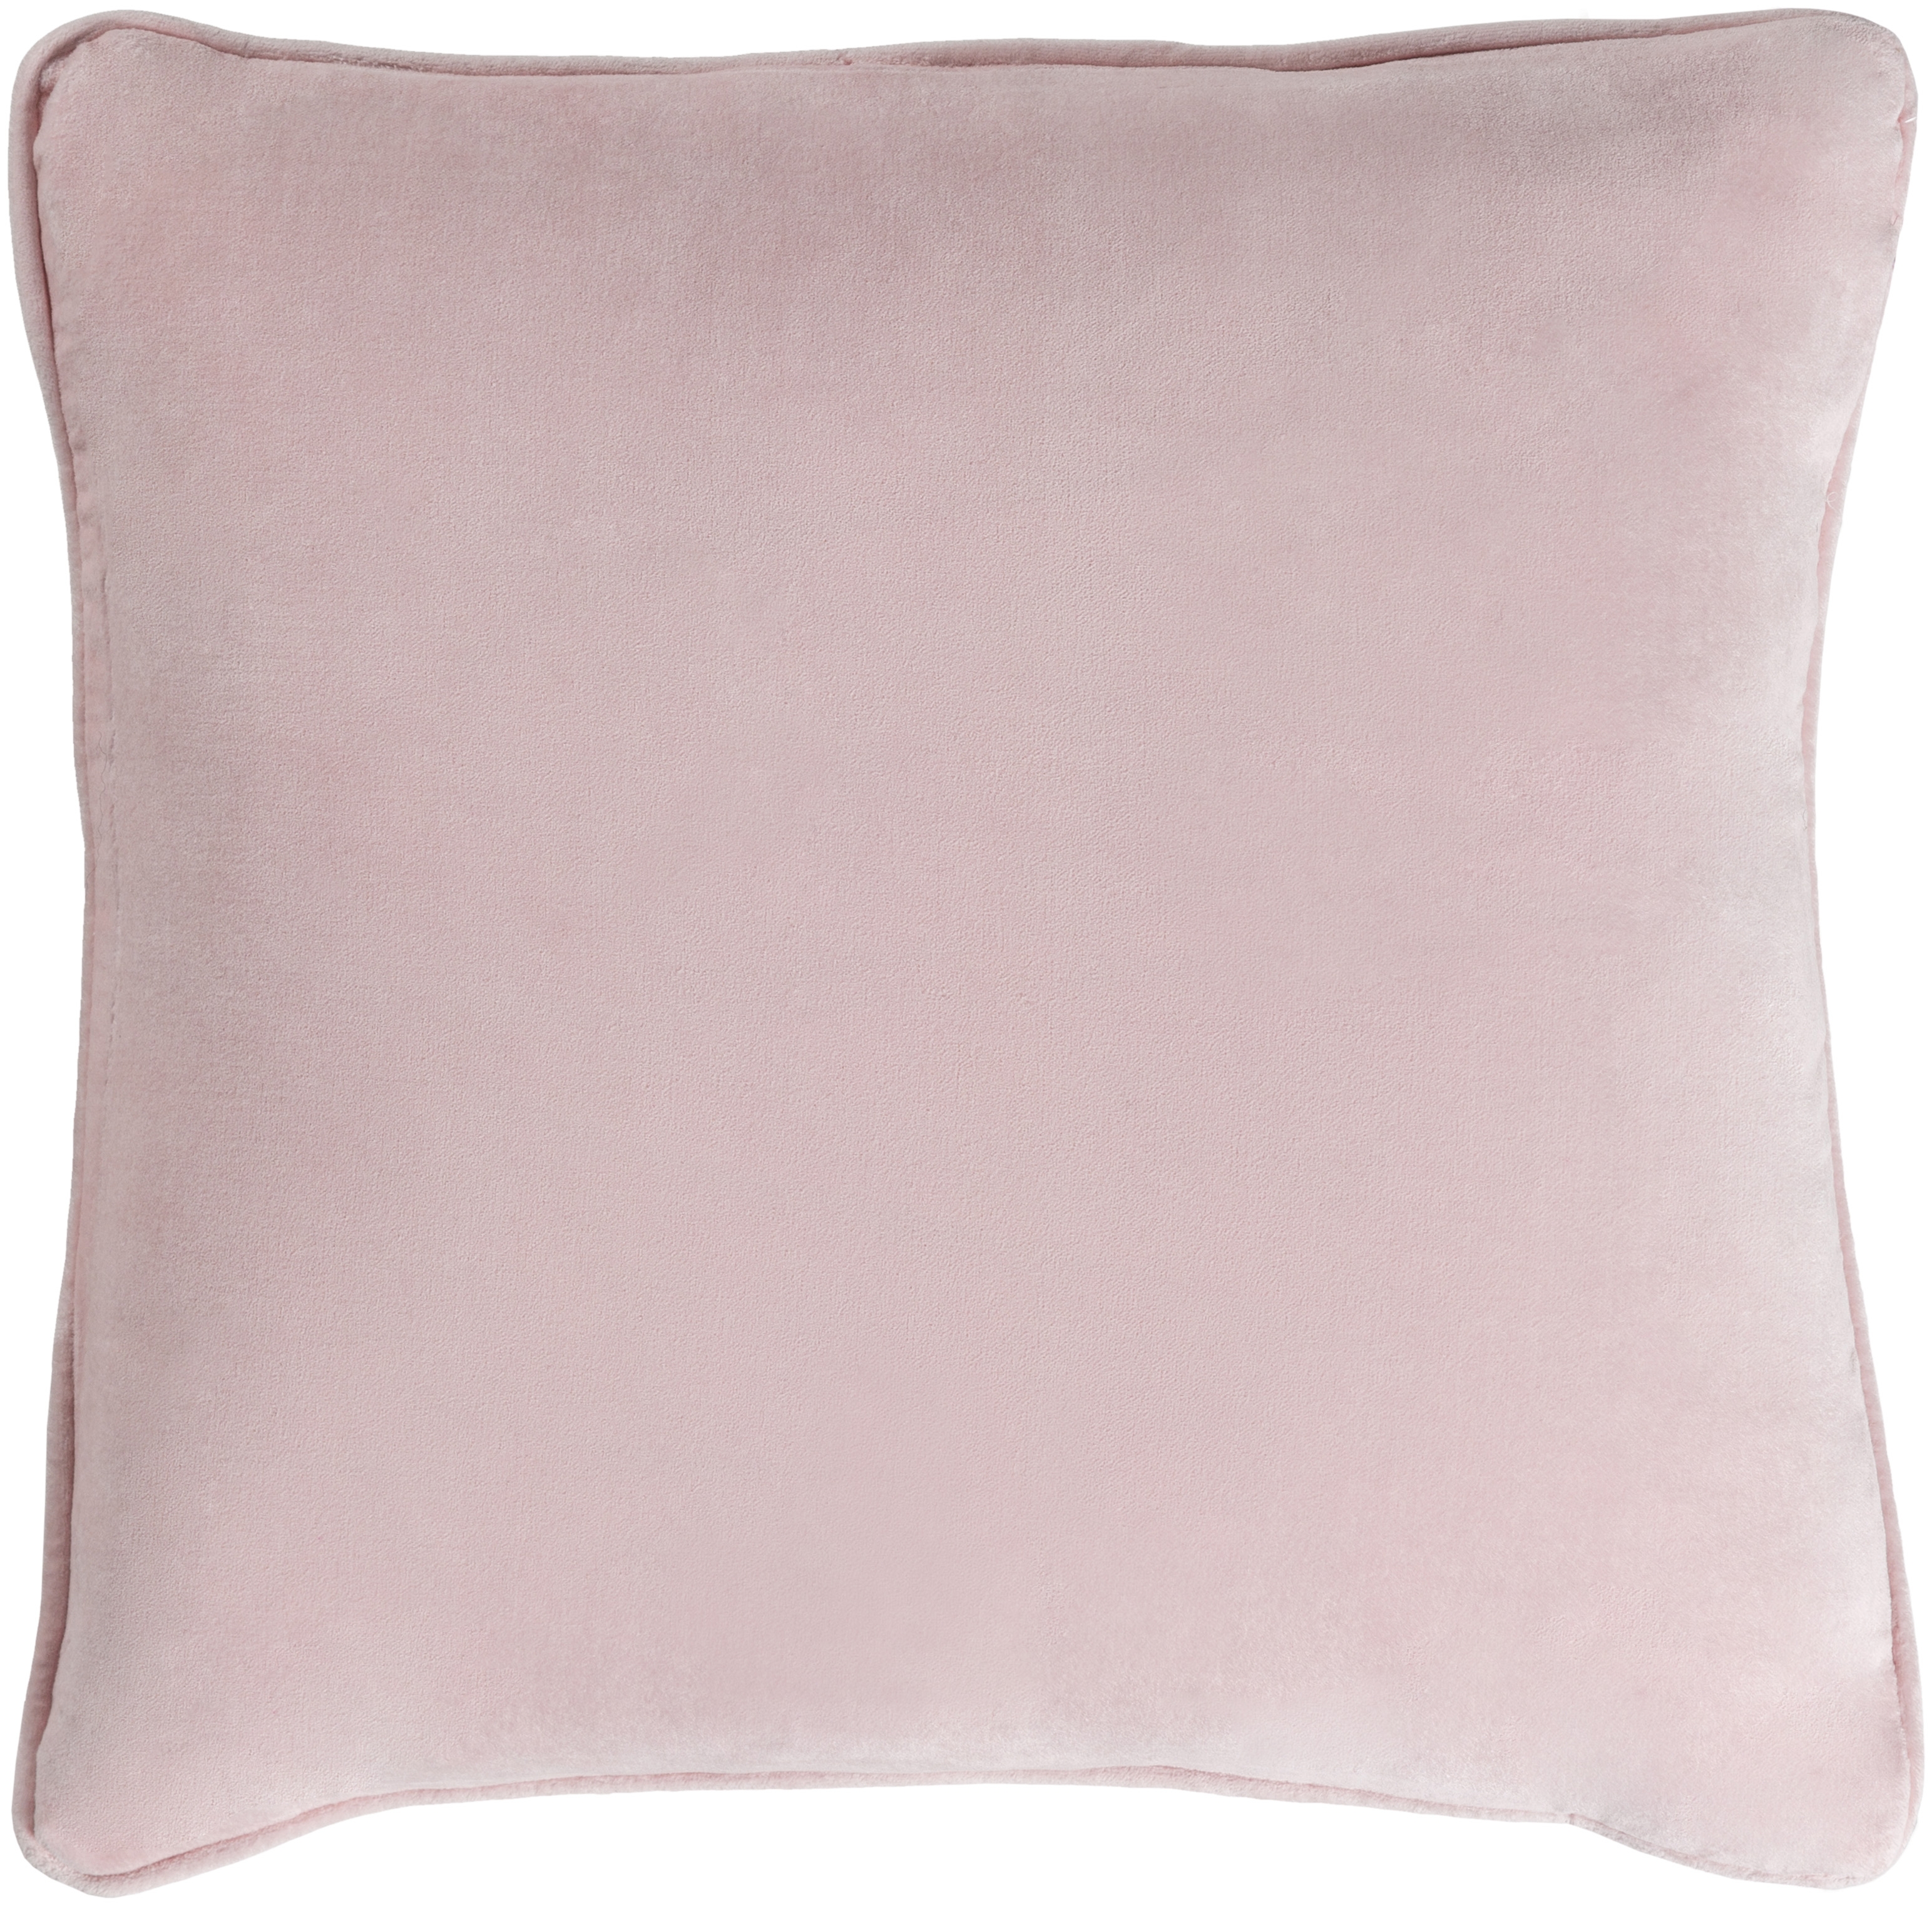 Safflower Throw Pillow, 18" x 18", with down insert - Image 0